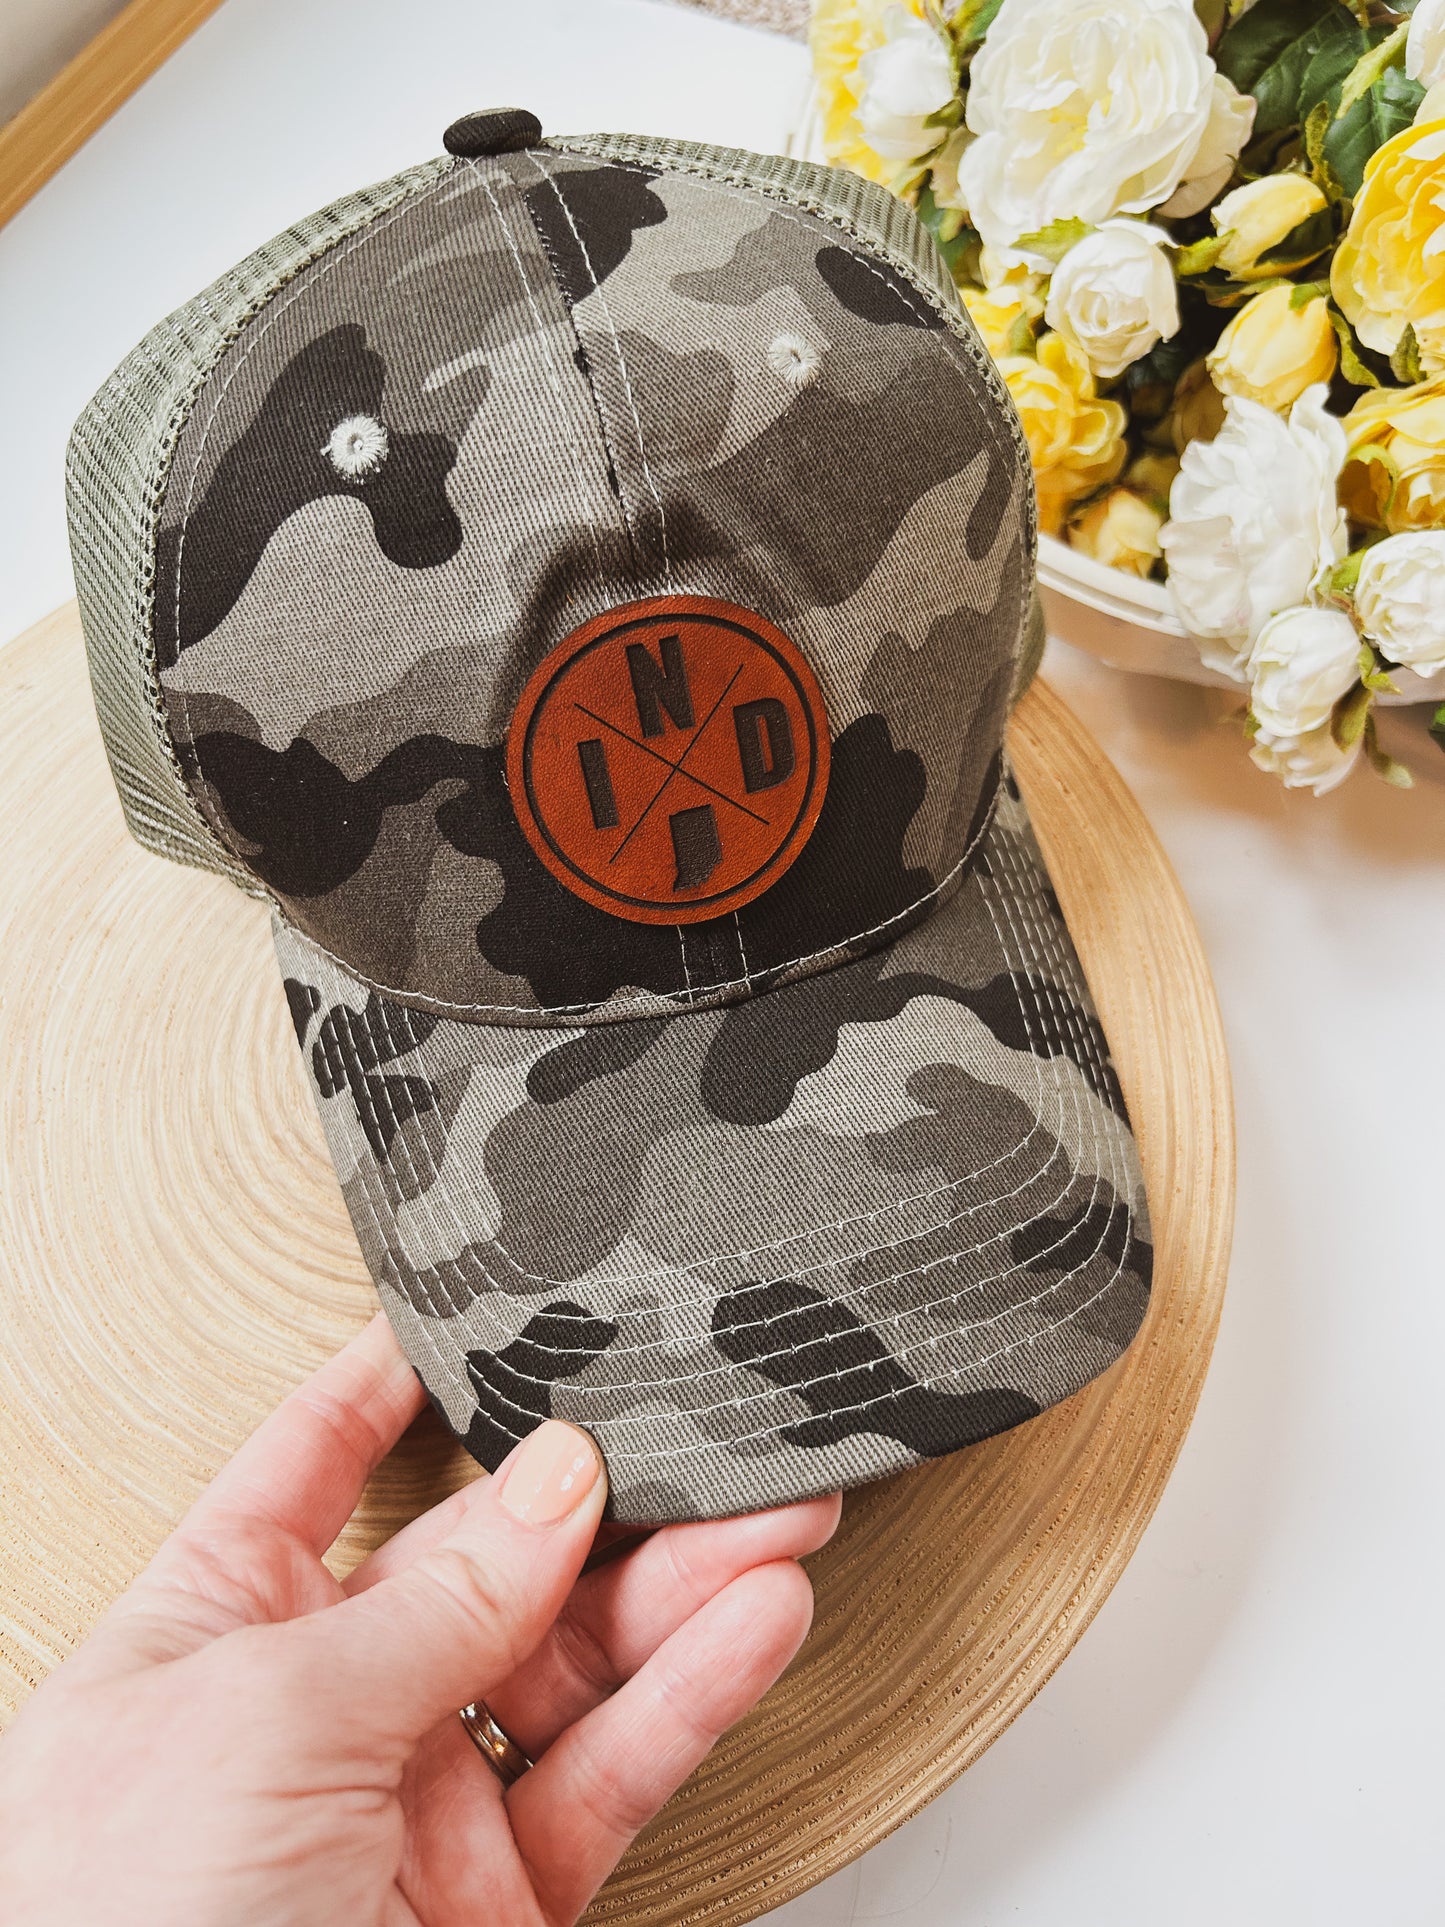 Circle IND Leather Patch on Camo Baseball Hat - Snap Closure